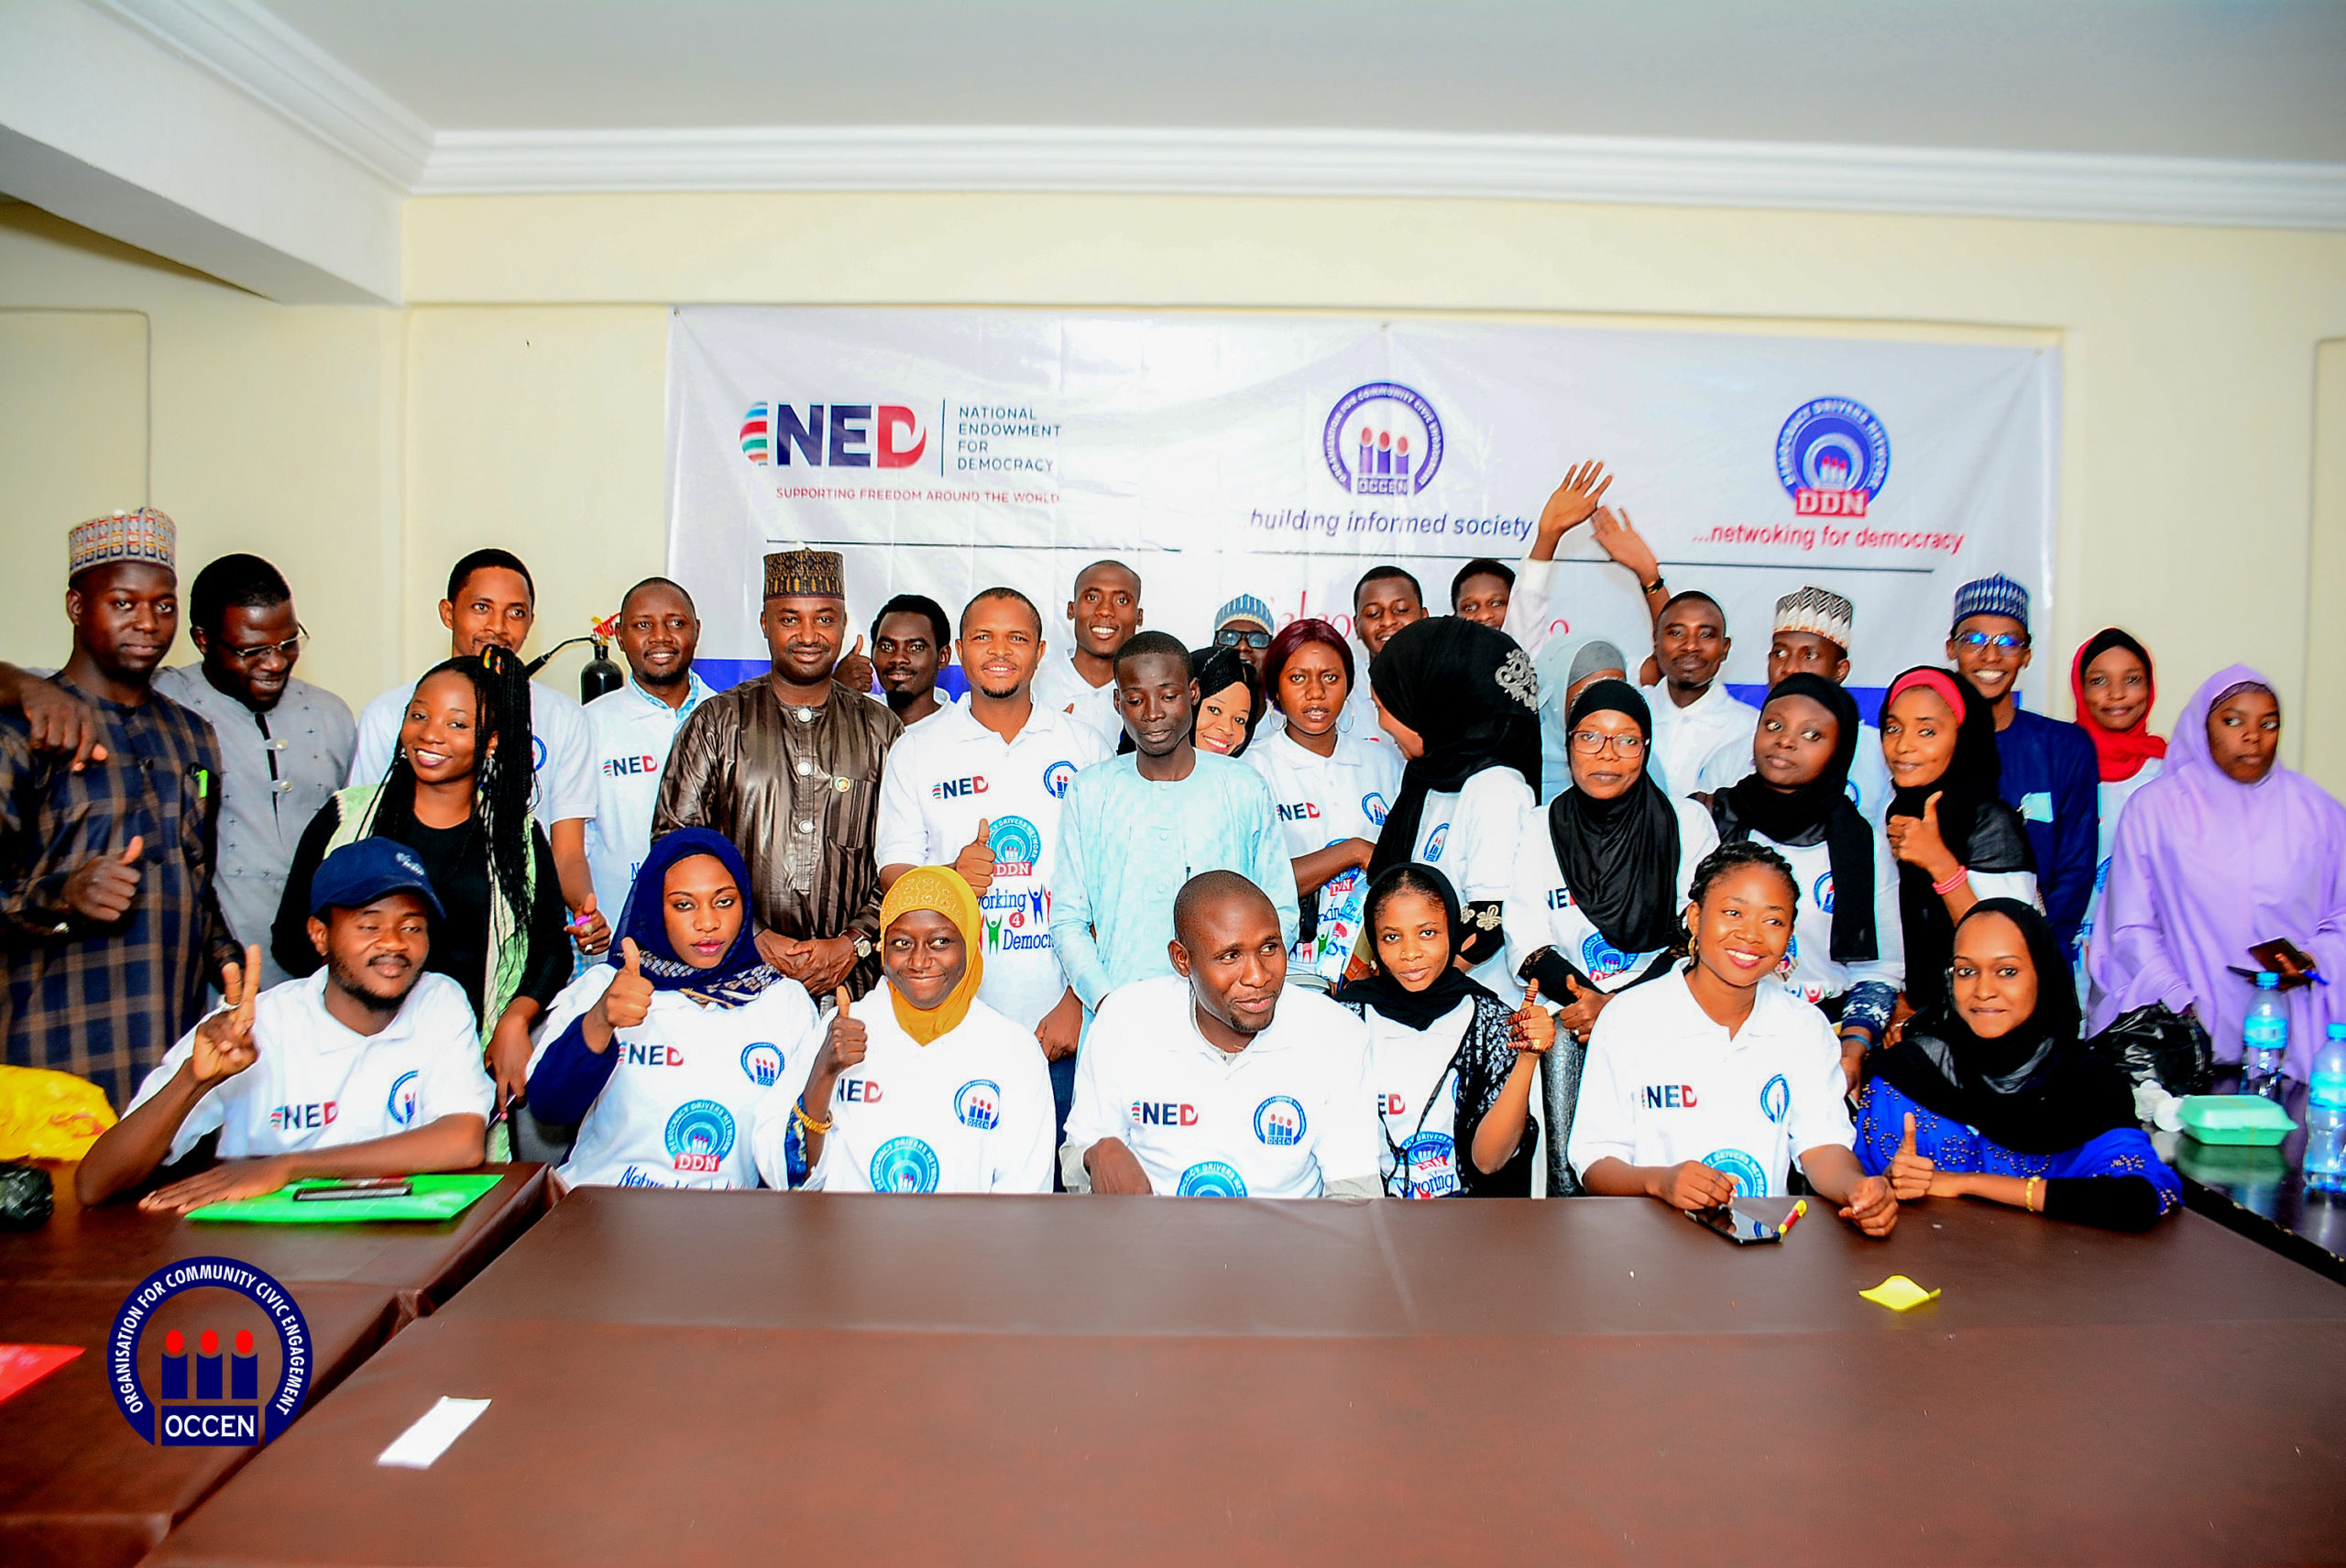 REPORT OF A THREE-DAY TRAINING ON DEMOCRACY AND CIVIC ENGAGEMENT FOR YOUTH IN NORTH WEST NIGERIA ORGANIZED BY ORGANIZATION FOR COMMUNITY CIVIC ENGAGEMENT (OCCEN) WITH FUNDING SUPPORT FROM NATIONAL ENDOWMENT FOR DEMOCRACY NED WASHINGTON DC BETWEEN 16TH – 18TH NOVEMBER 2021 AT TAHIR GUEST PALACE, KANO